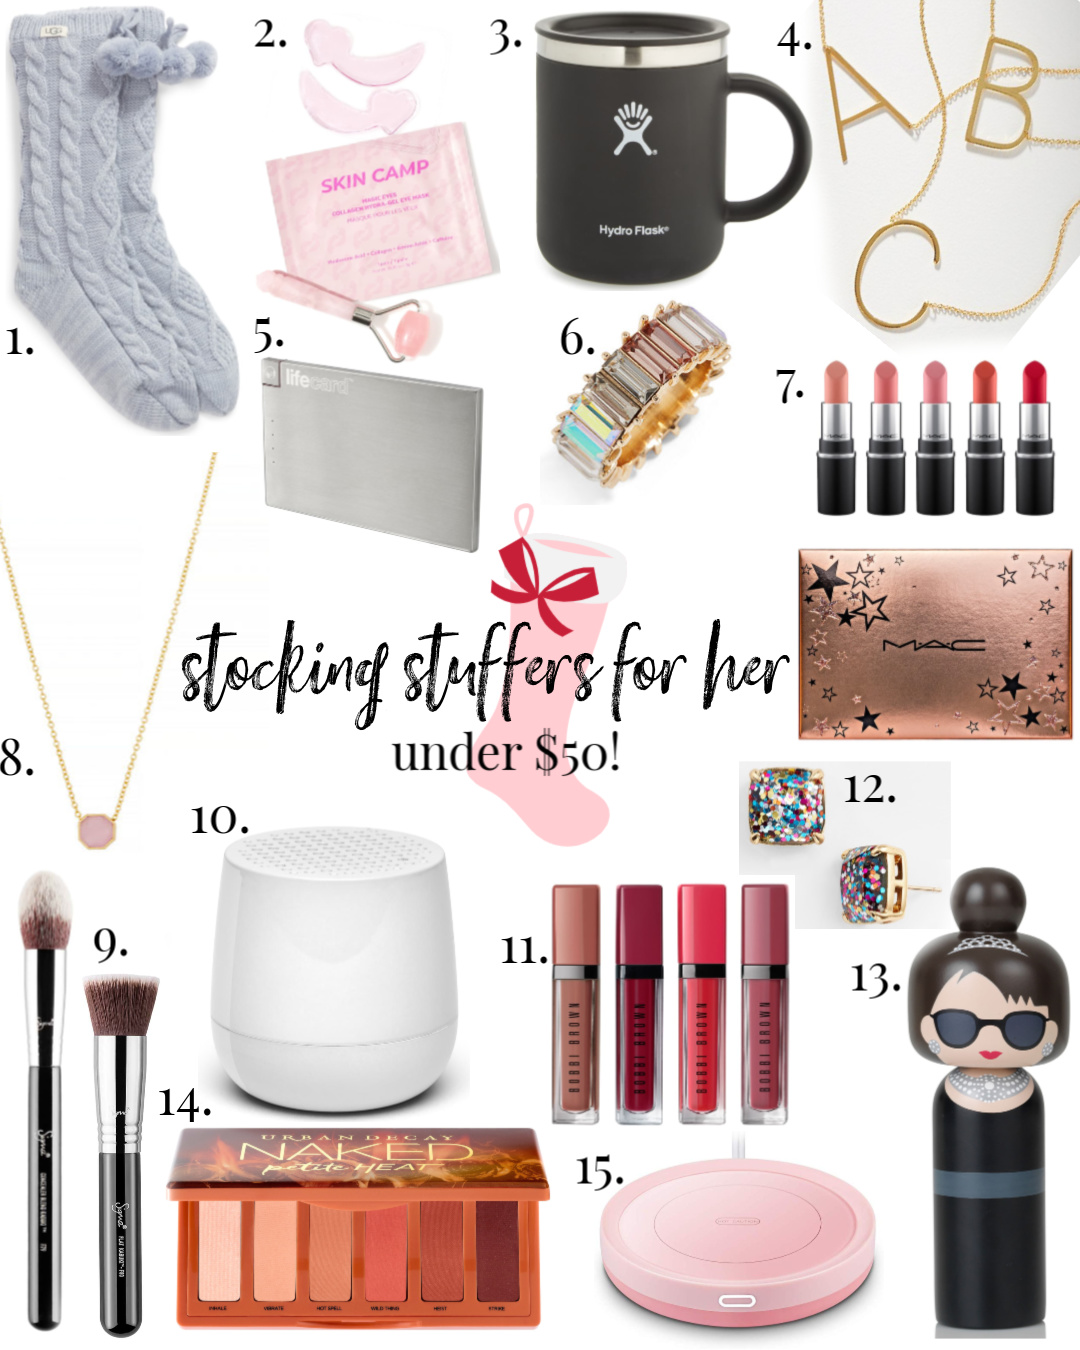 2019 Stocking Stuffer Gift Guide - 30 Gifts Under $25